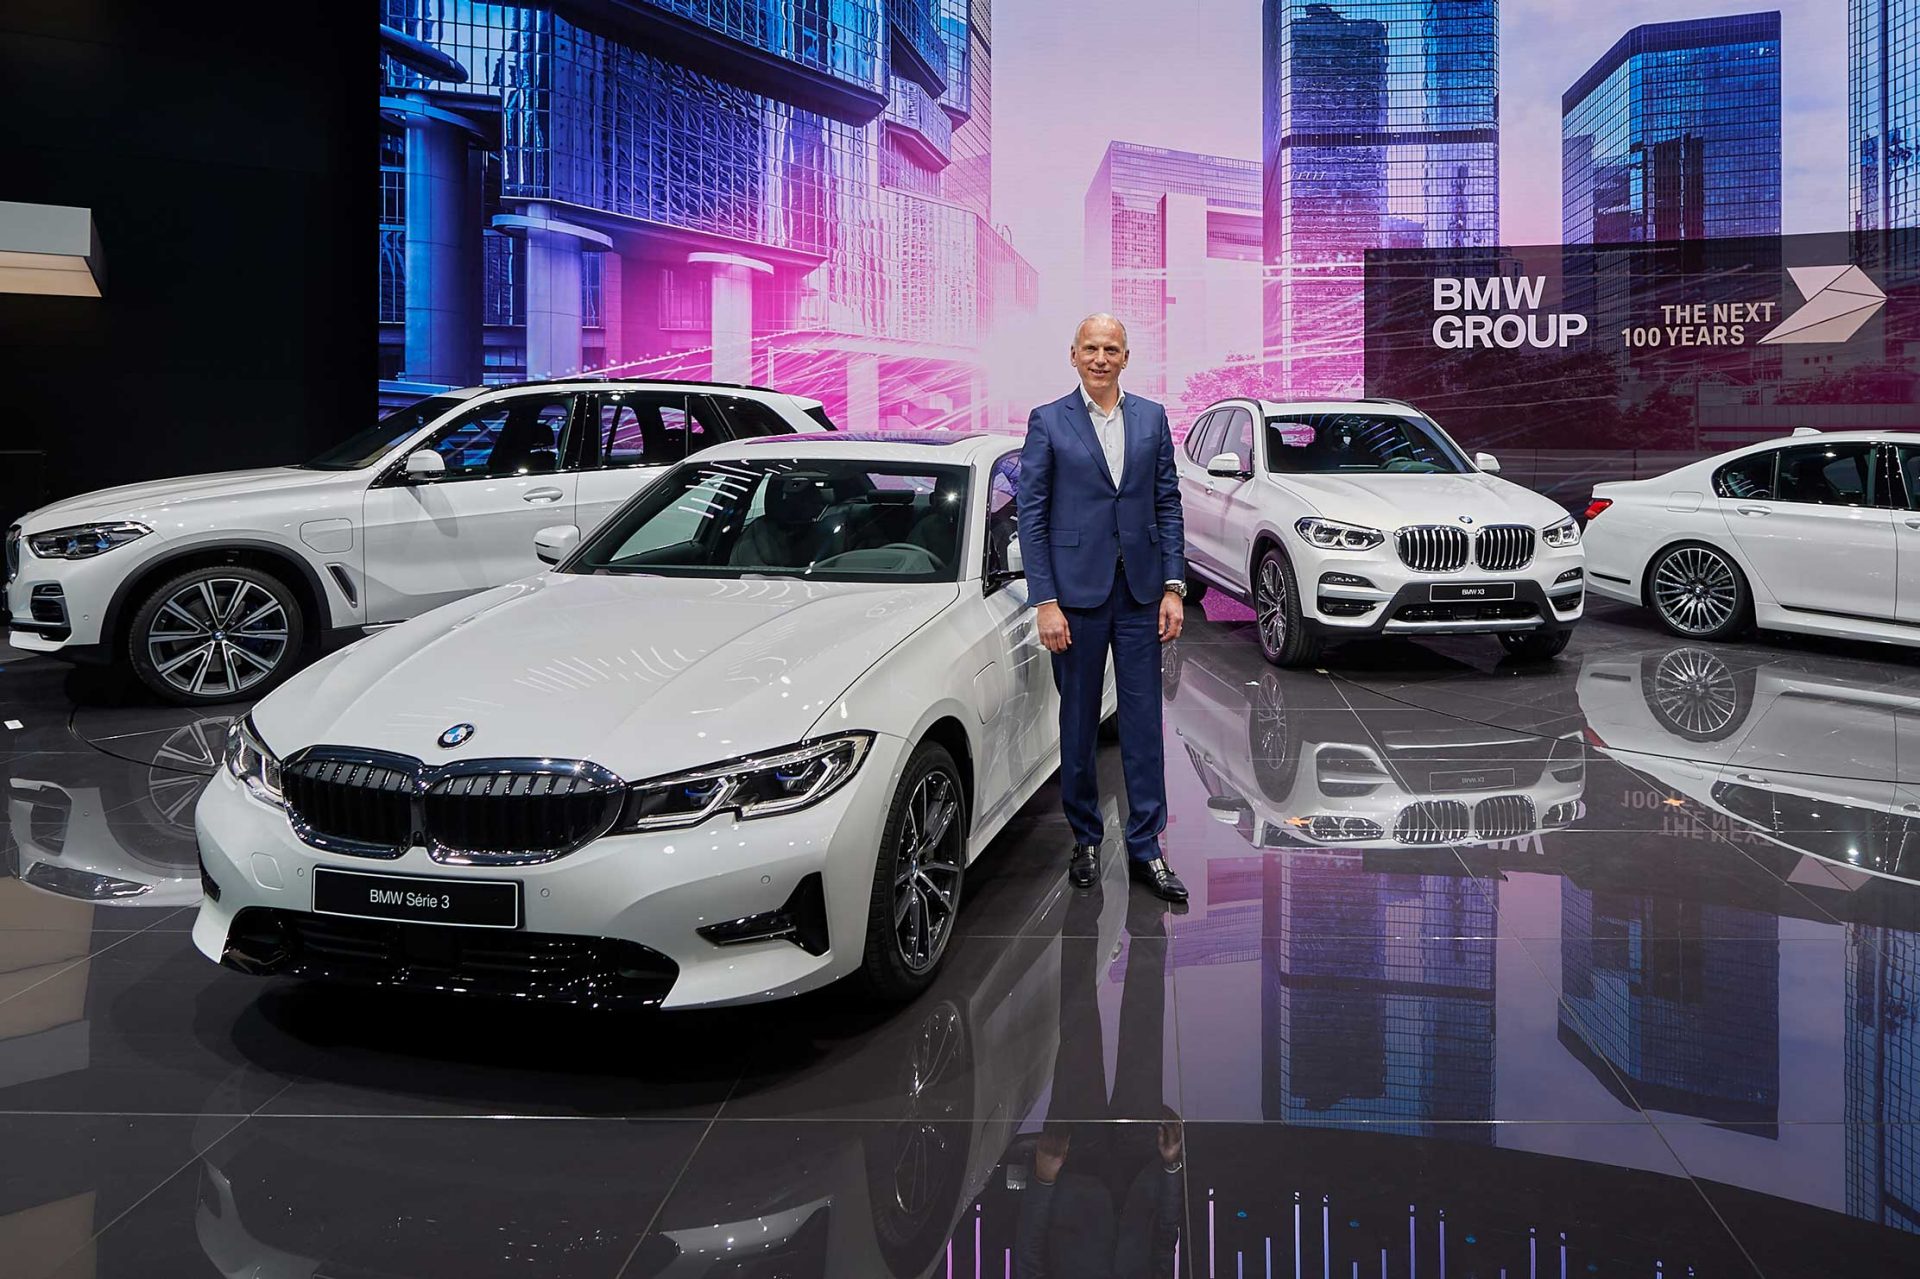 Pieter Nota with various BMW models